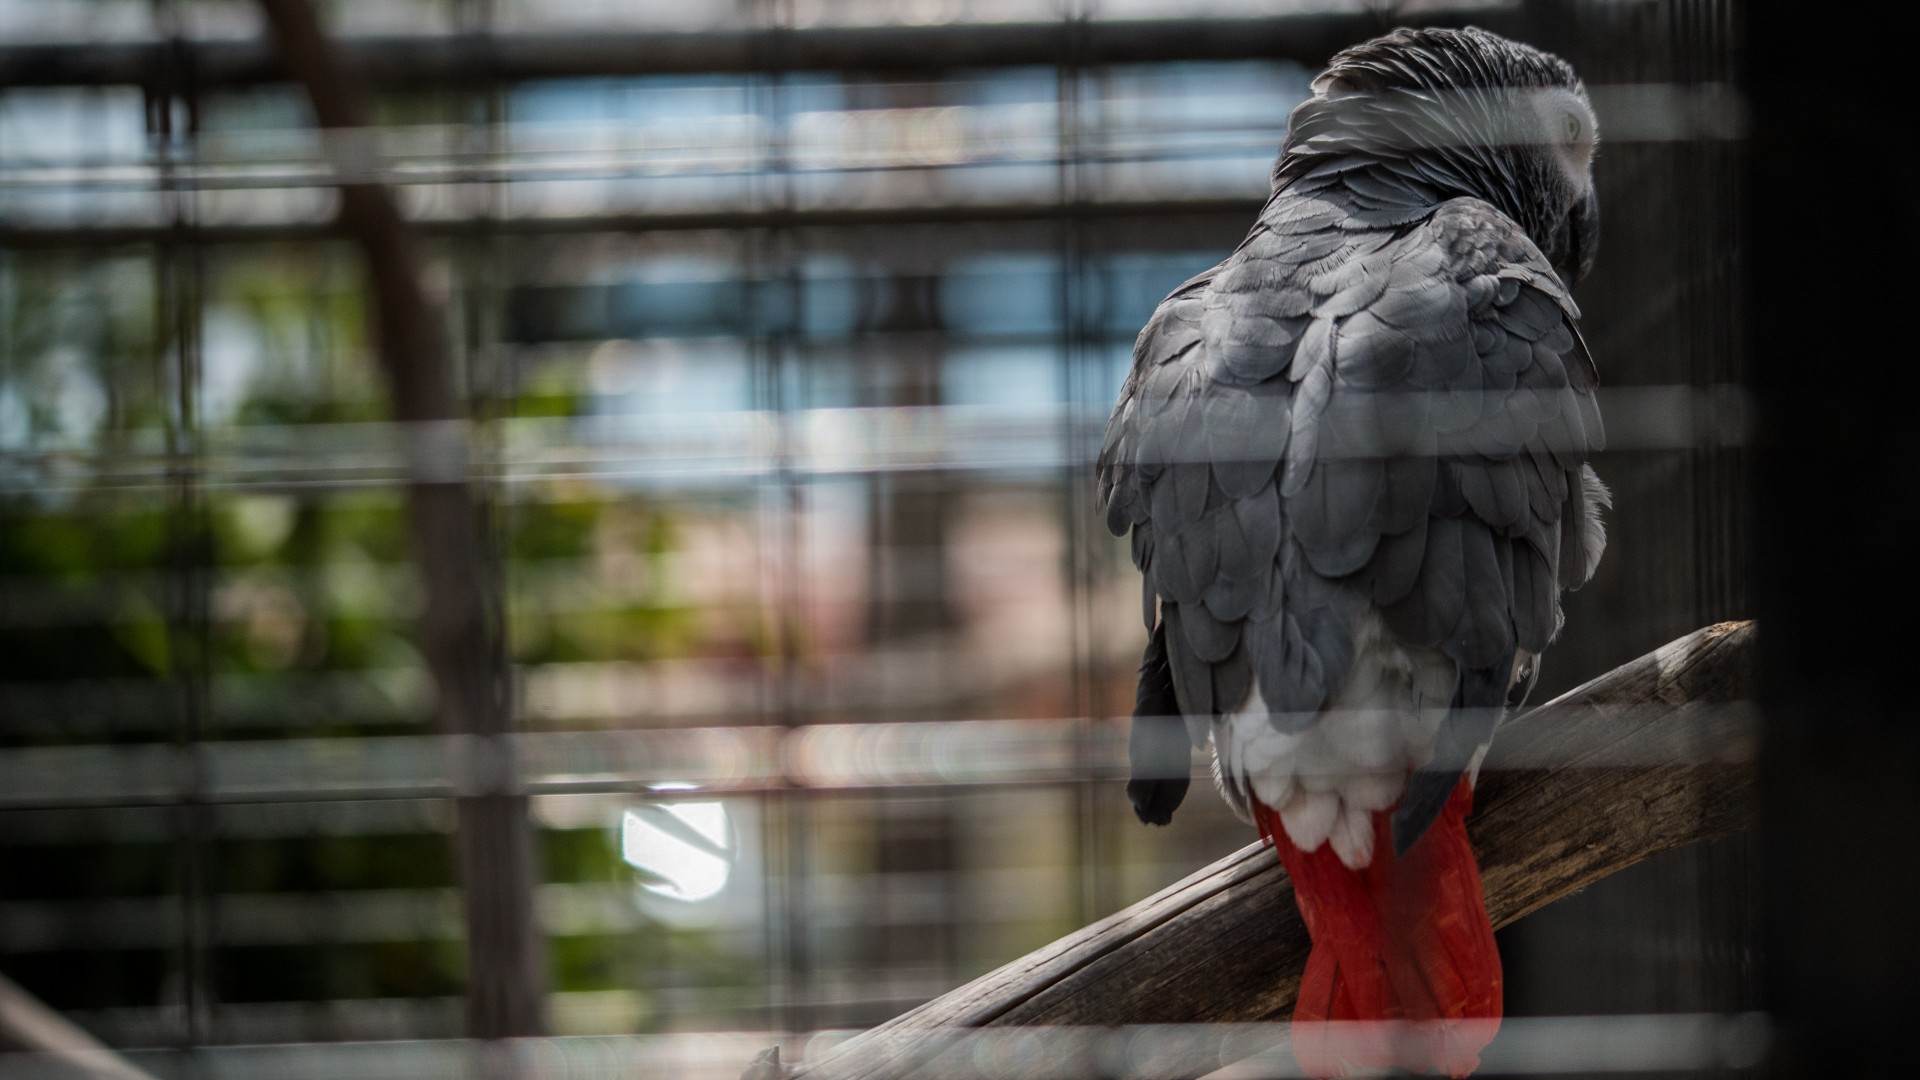 A grey parrot in a cage